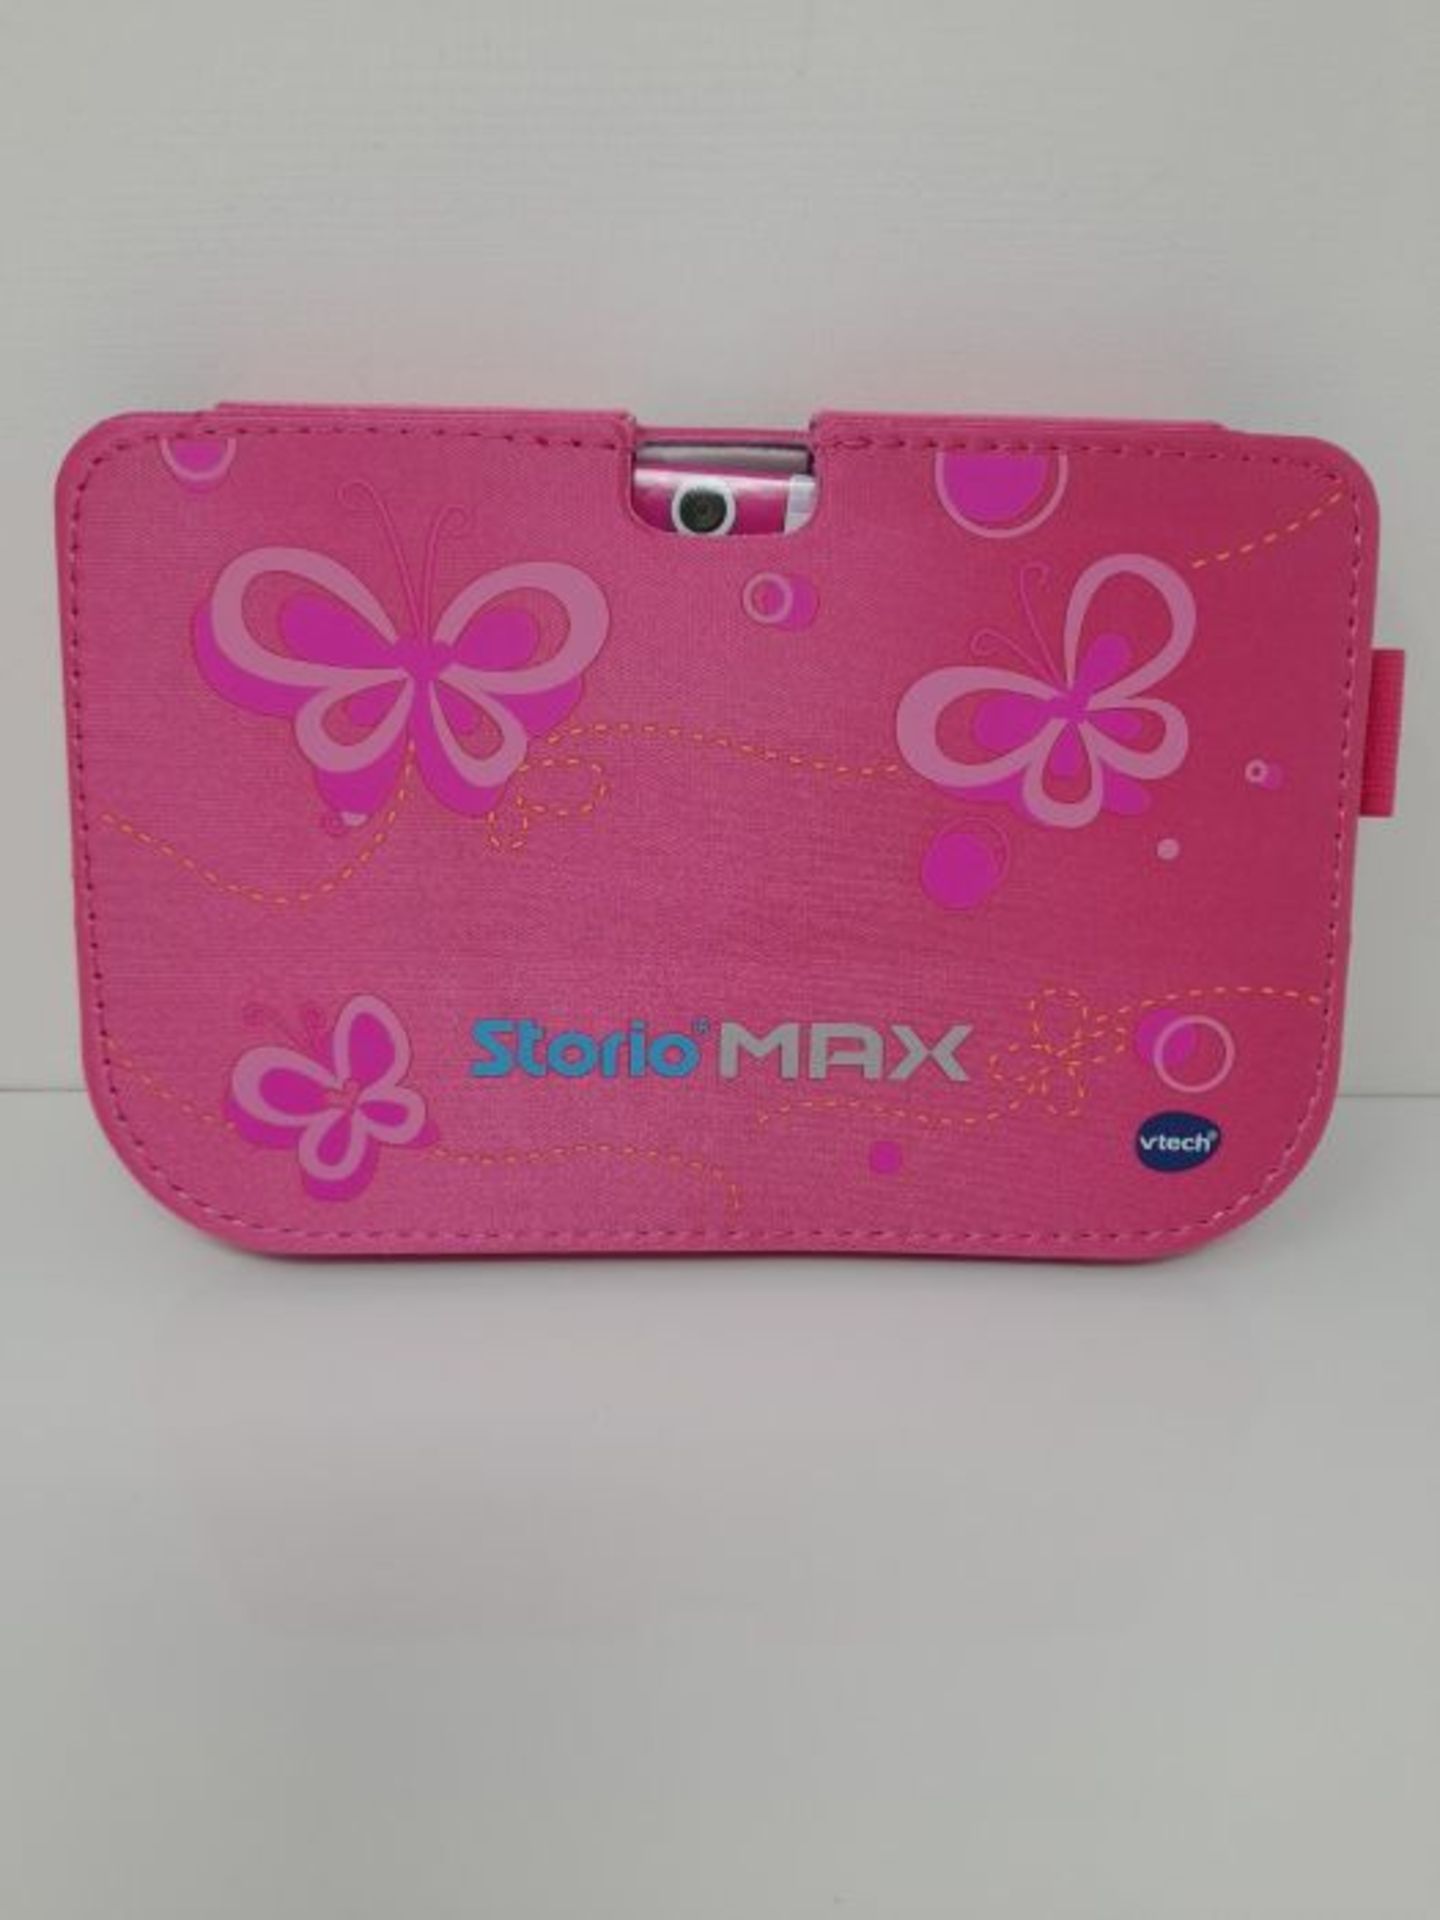 Storio MAX 5"" Schutzh·lle pink - Image 2 of 3